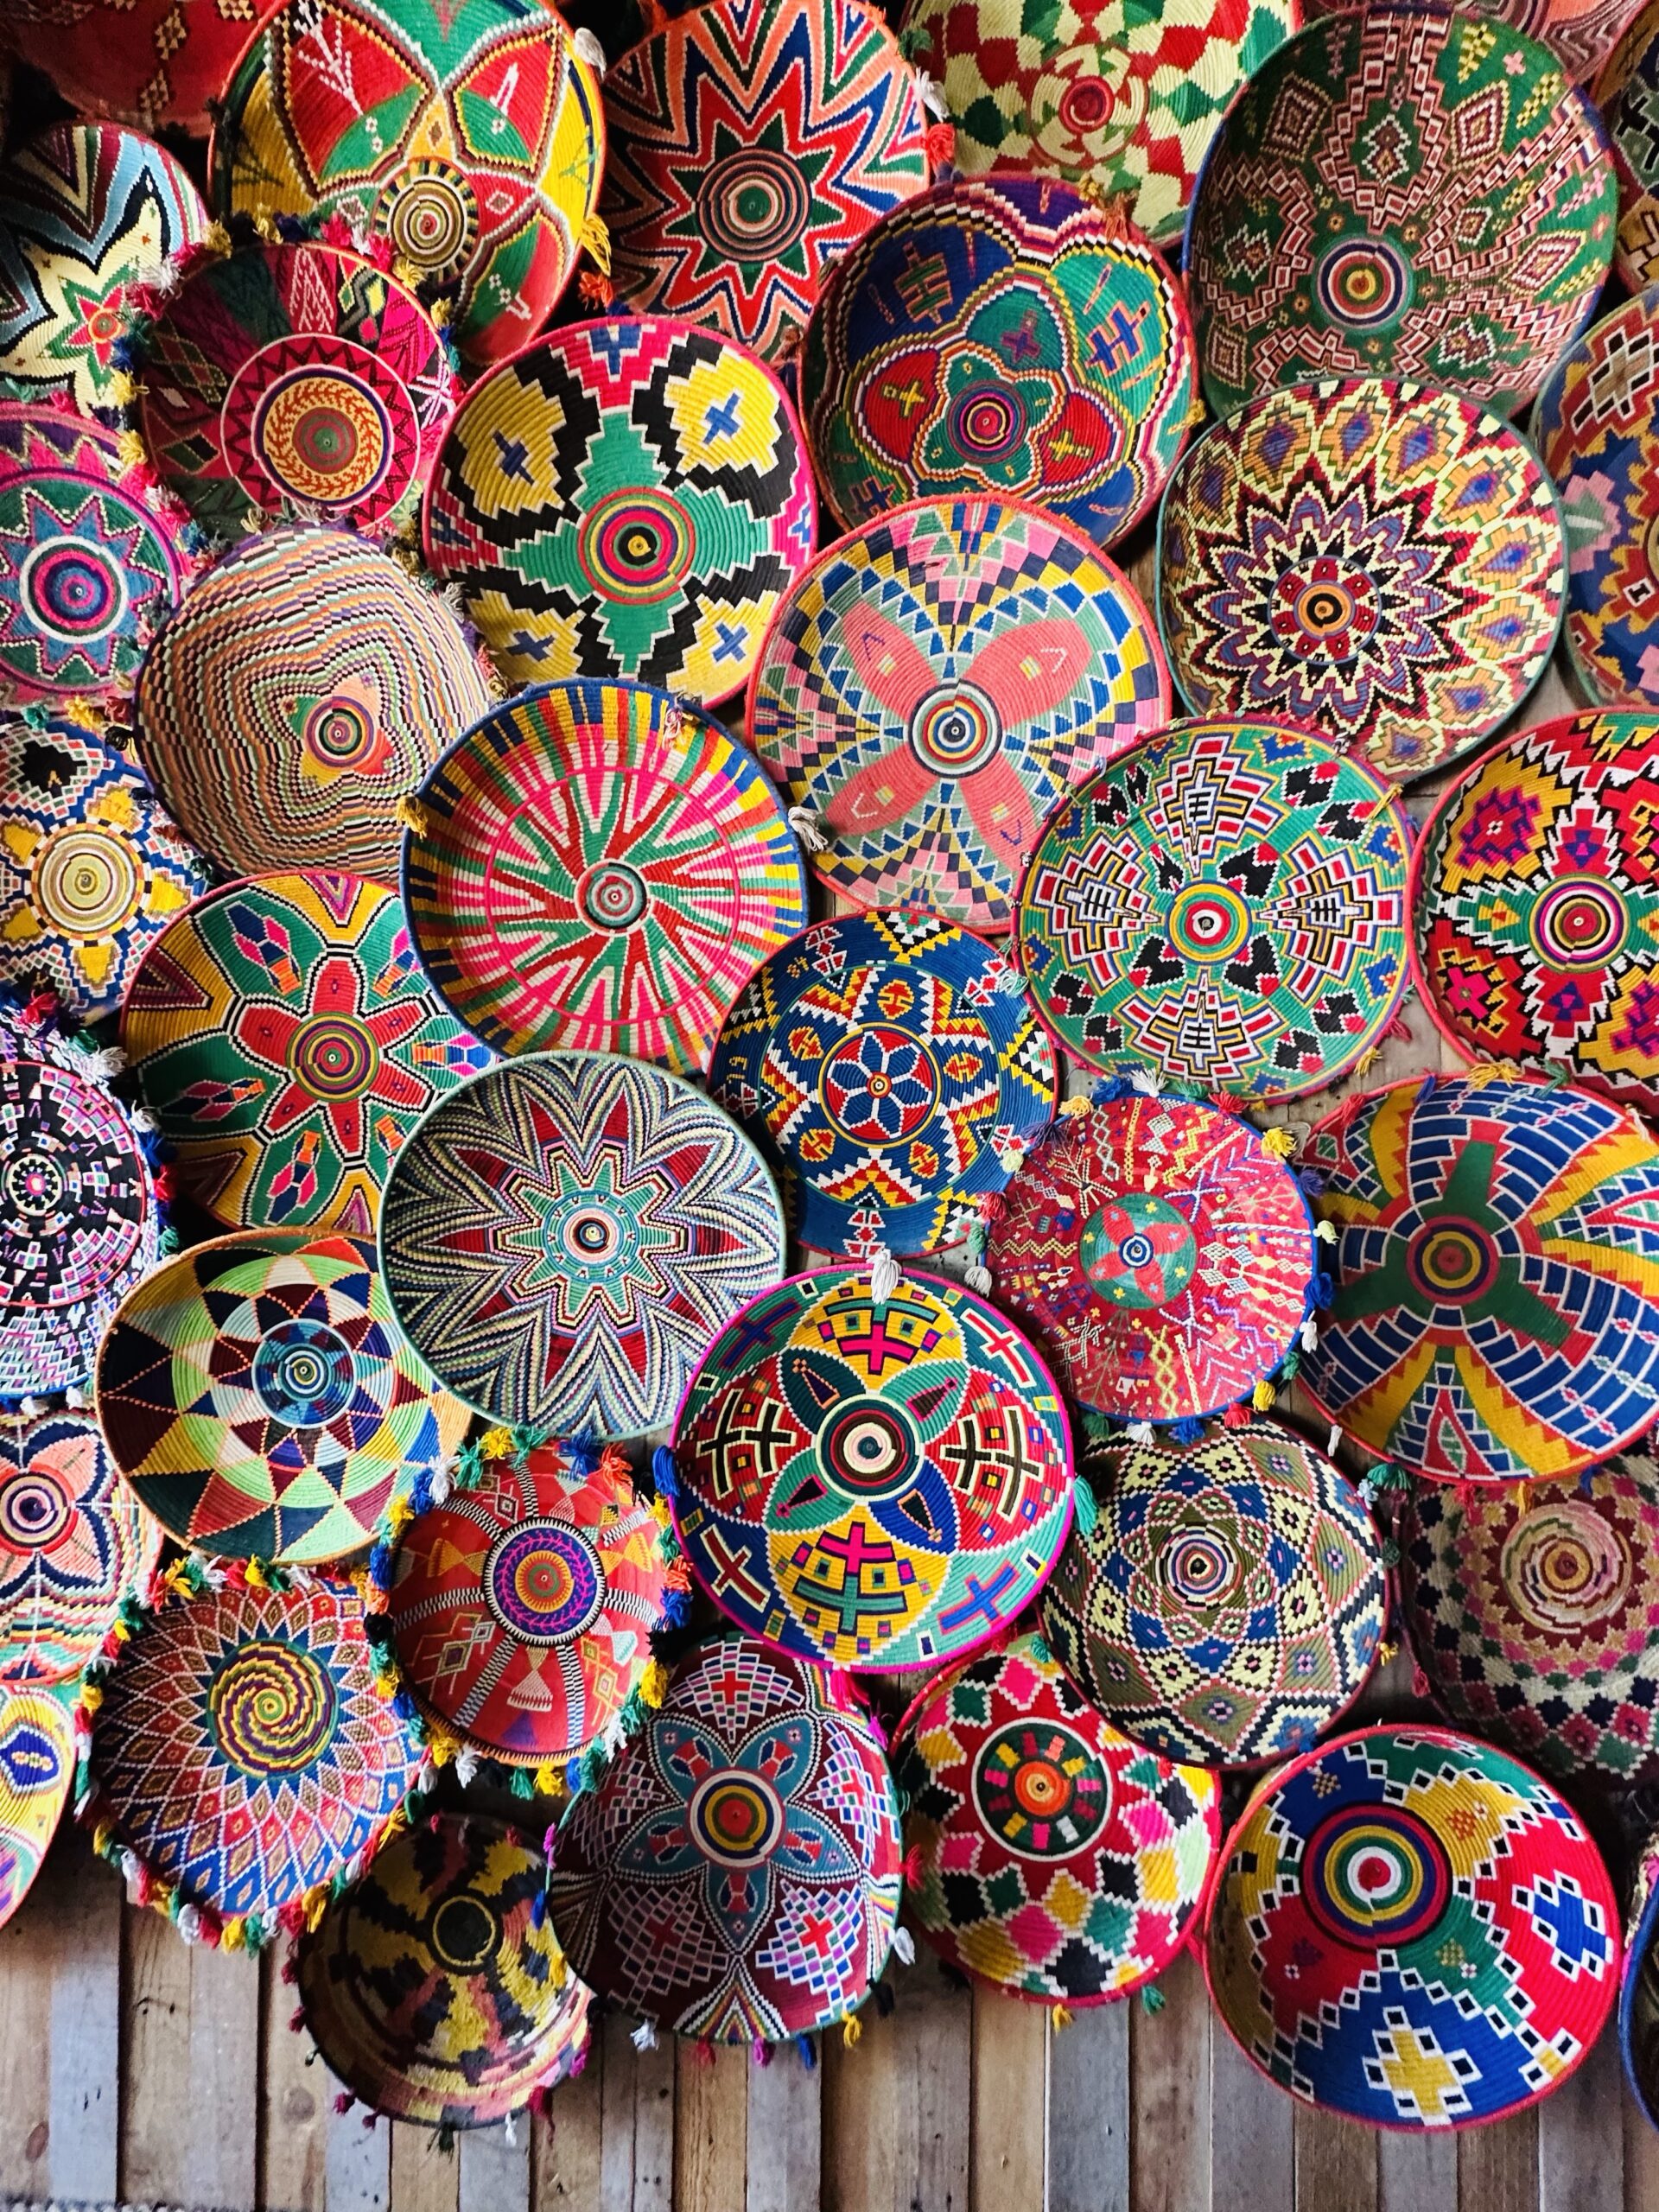 Euphoric Threads Travel Blog - Euphoric Escapades - The Adventures of Griffindor - The Ultimate Travel Guide to Shopping in Morocco. Mega Loft colourful interiors